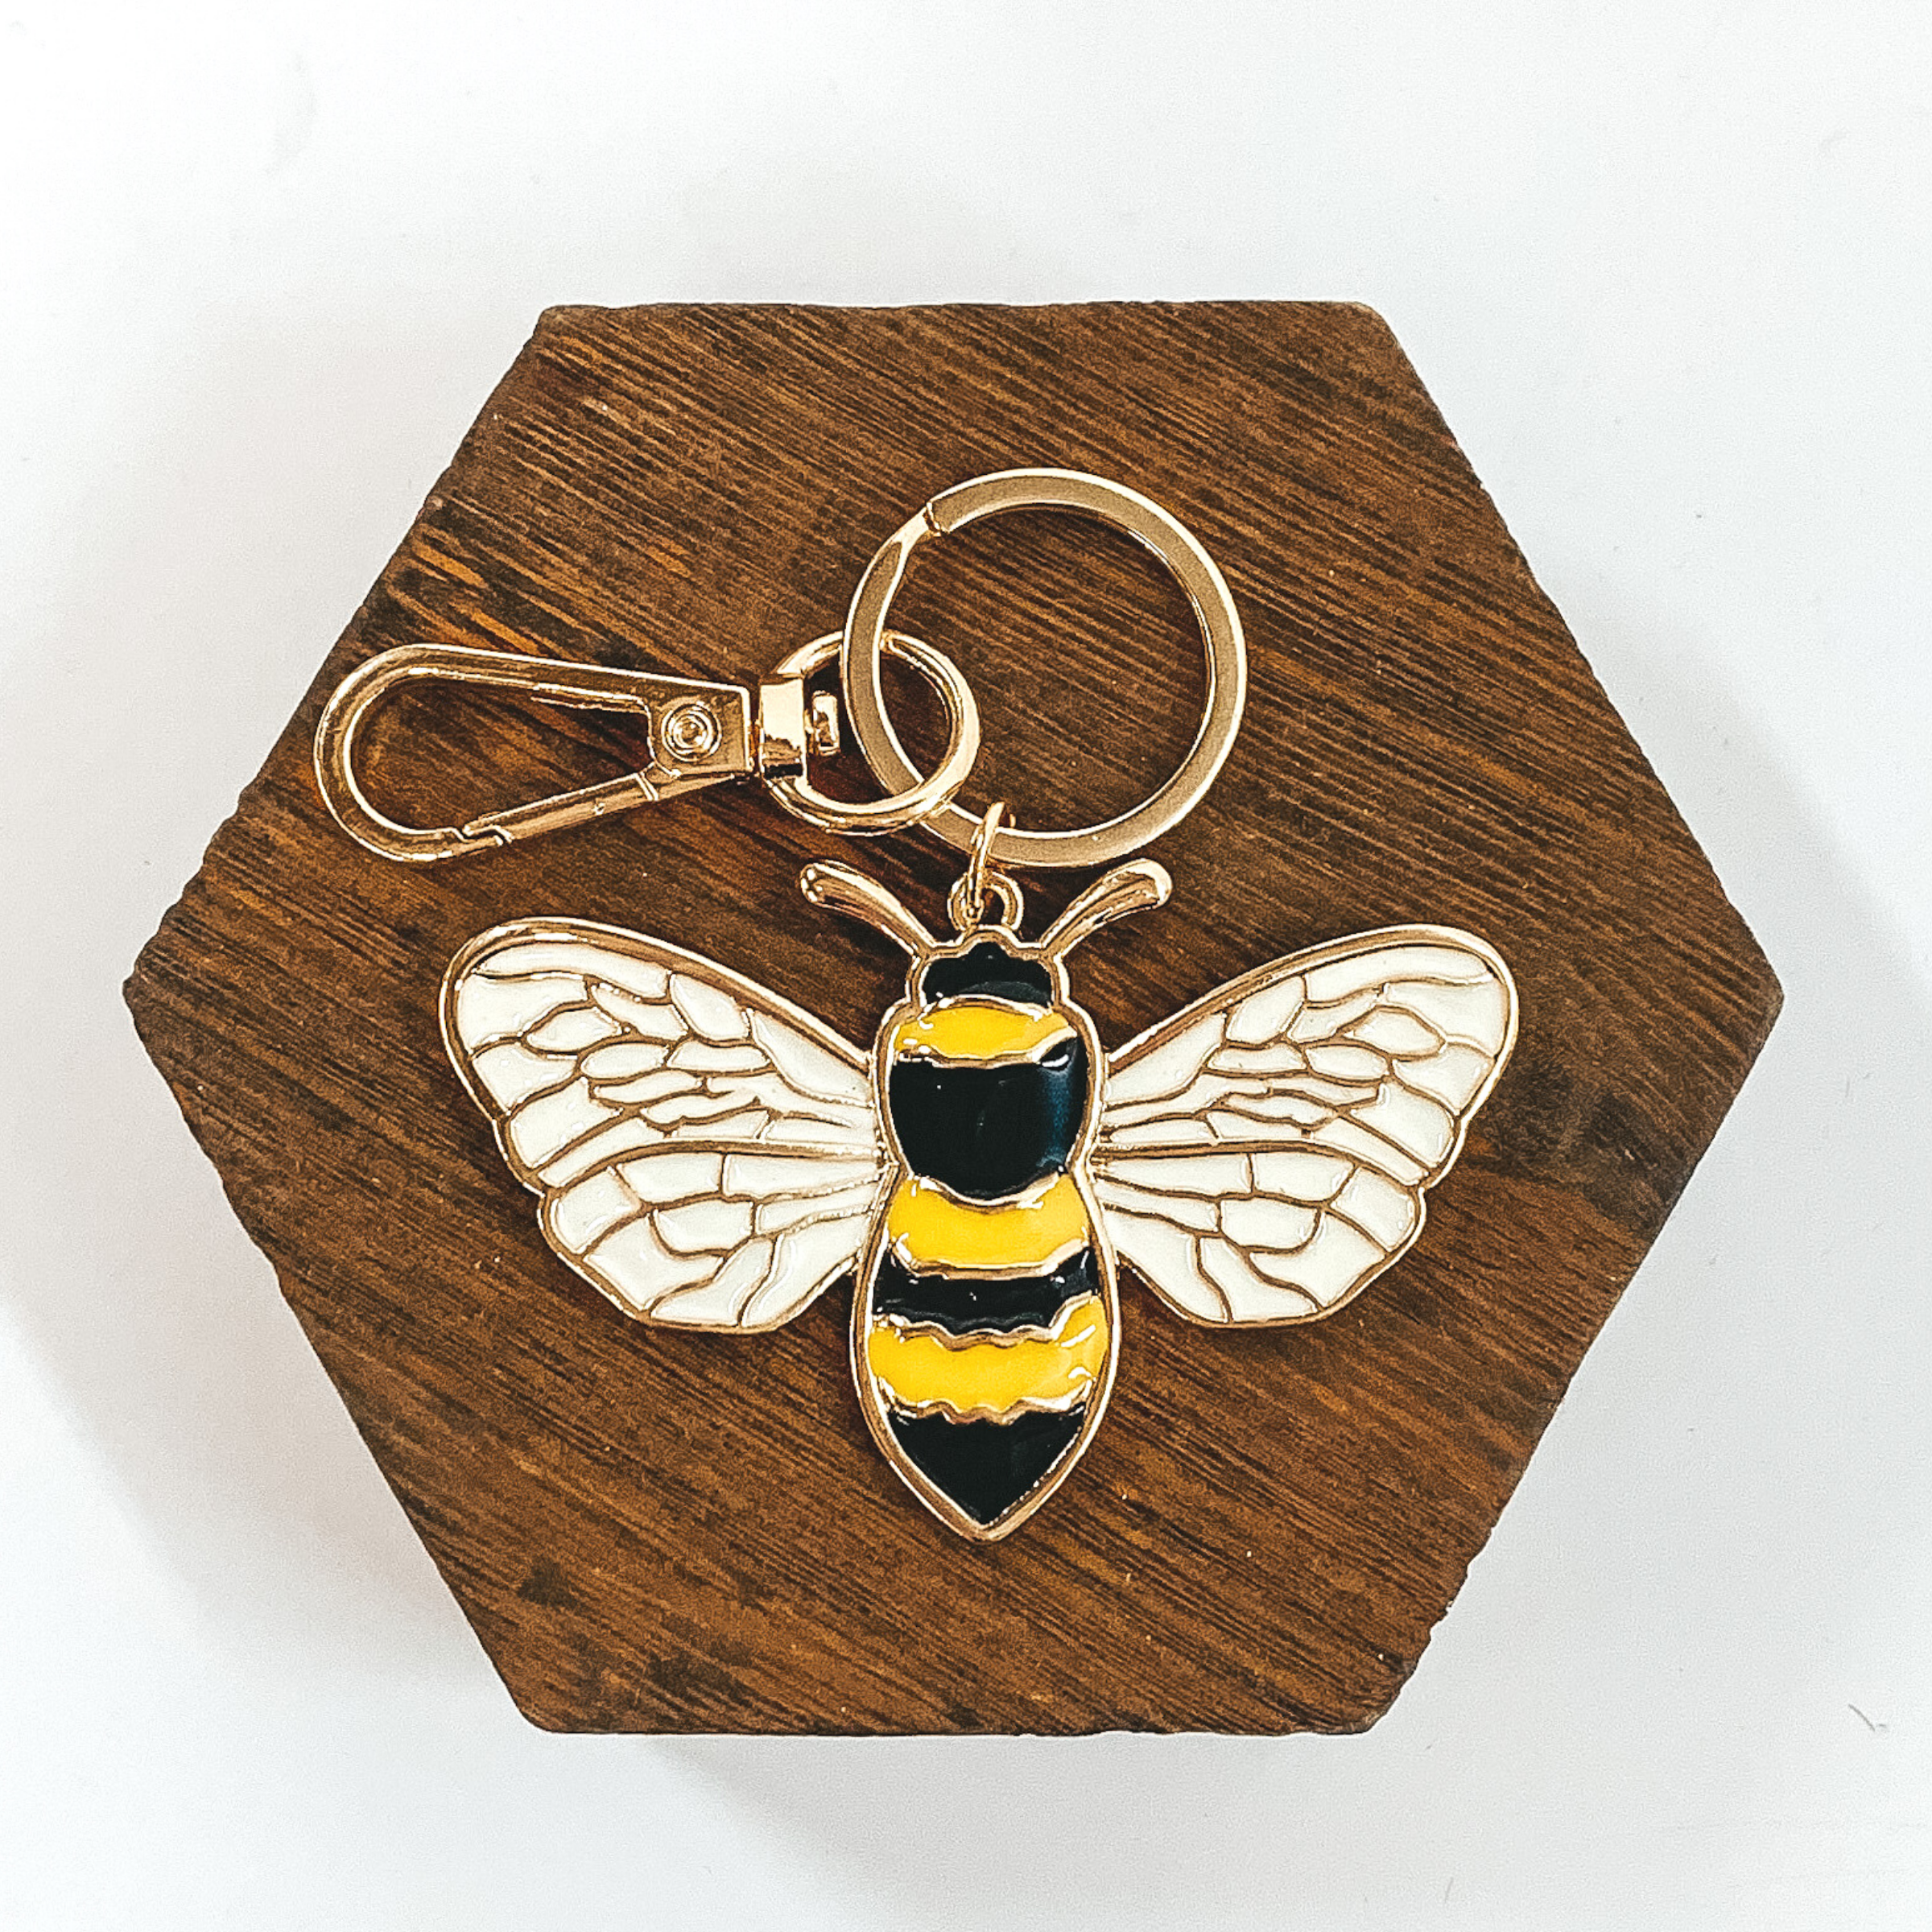 This is a gold key chain with a bumble bee pendant. The pendant includes white, yellow, and block colors. It is pictured on a white background laying on a dark brown hexagon.